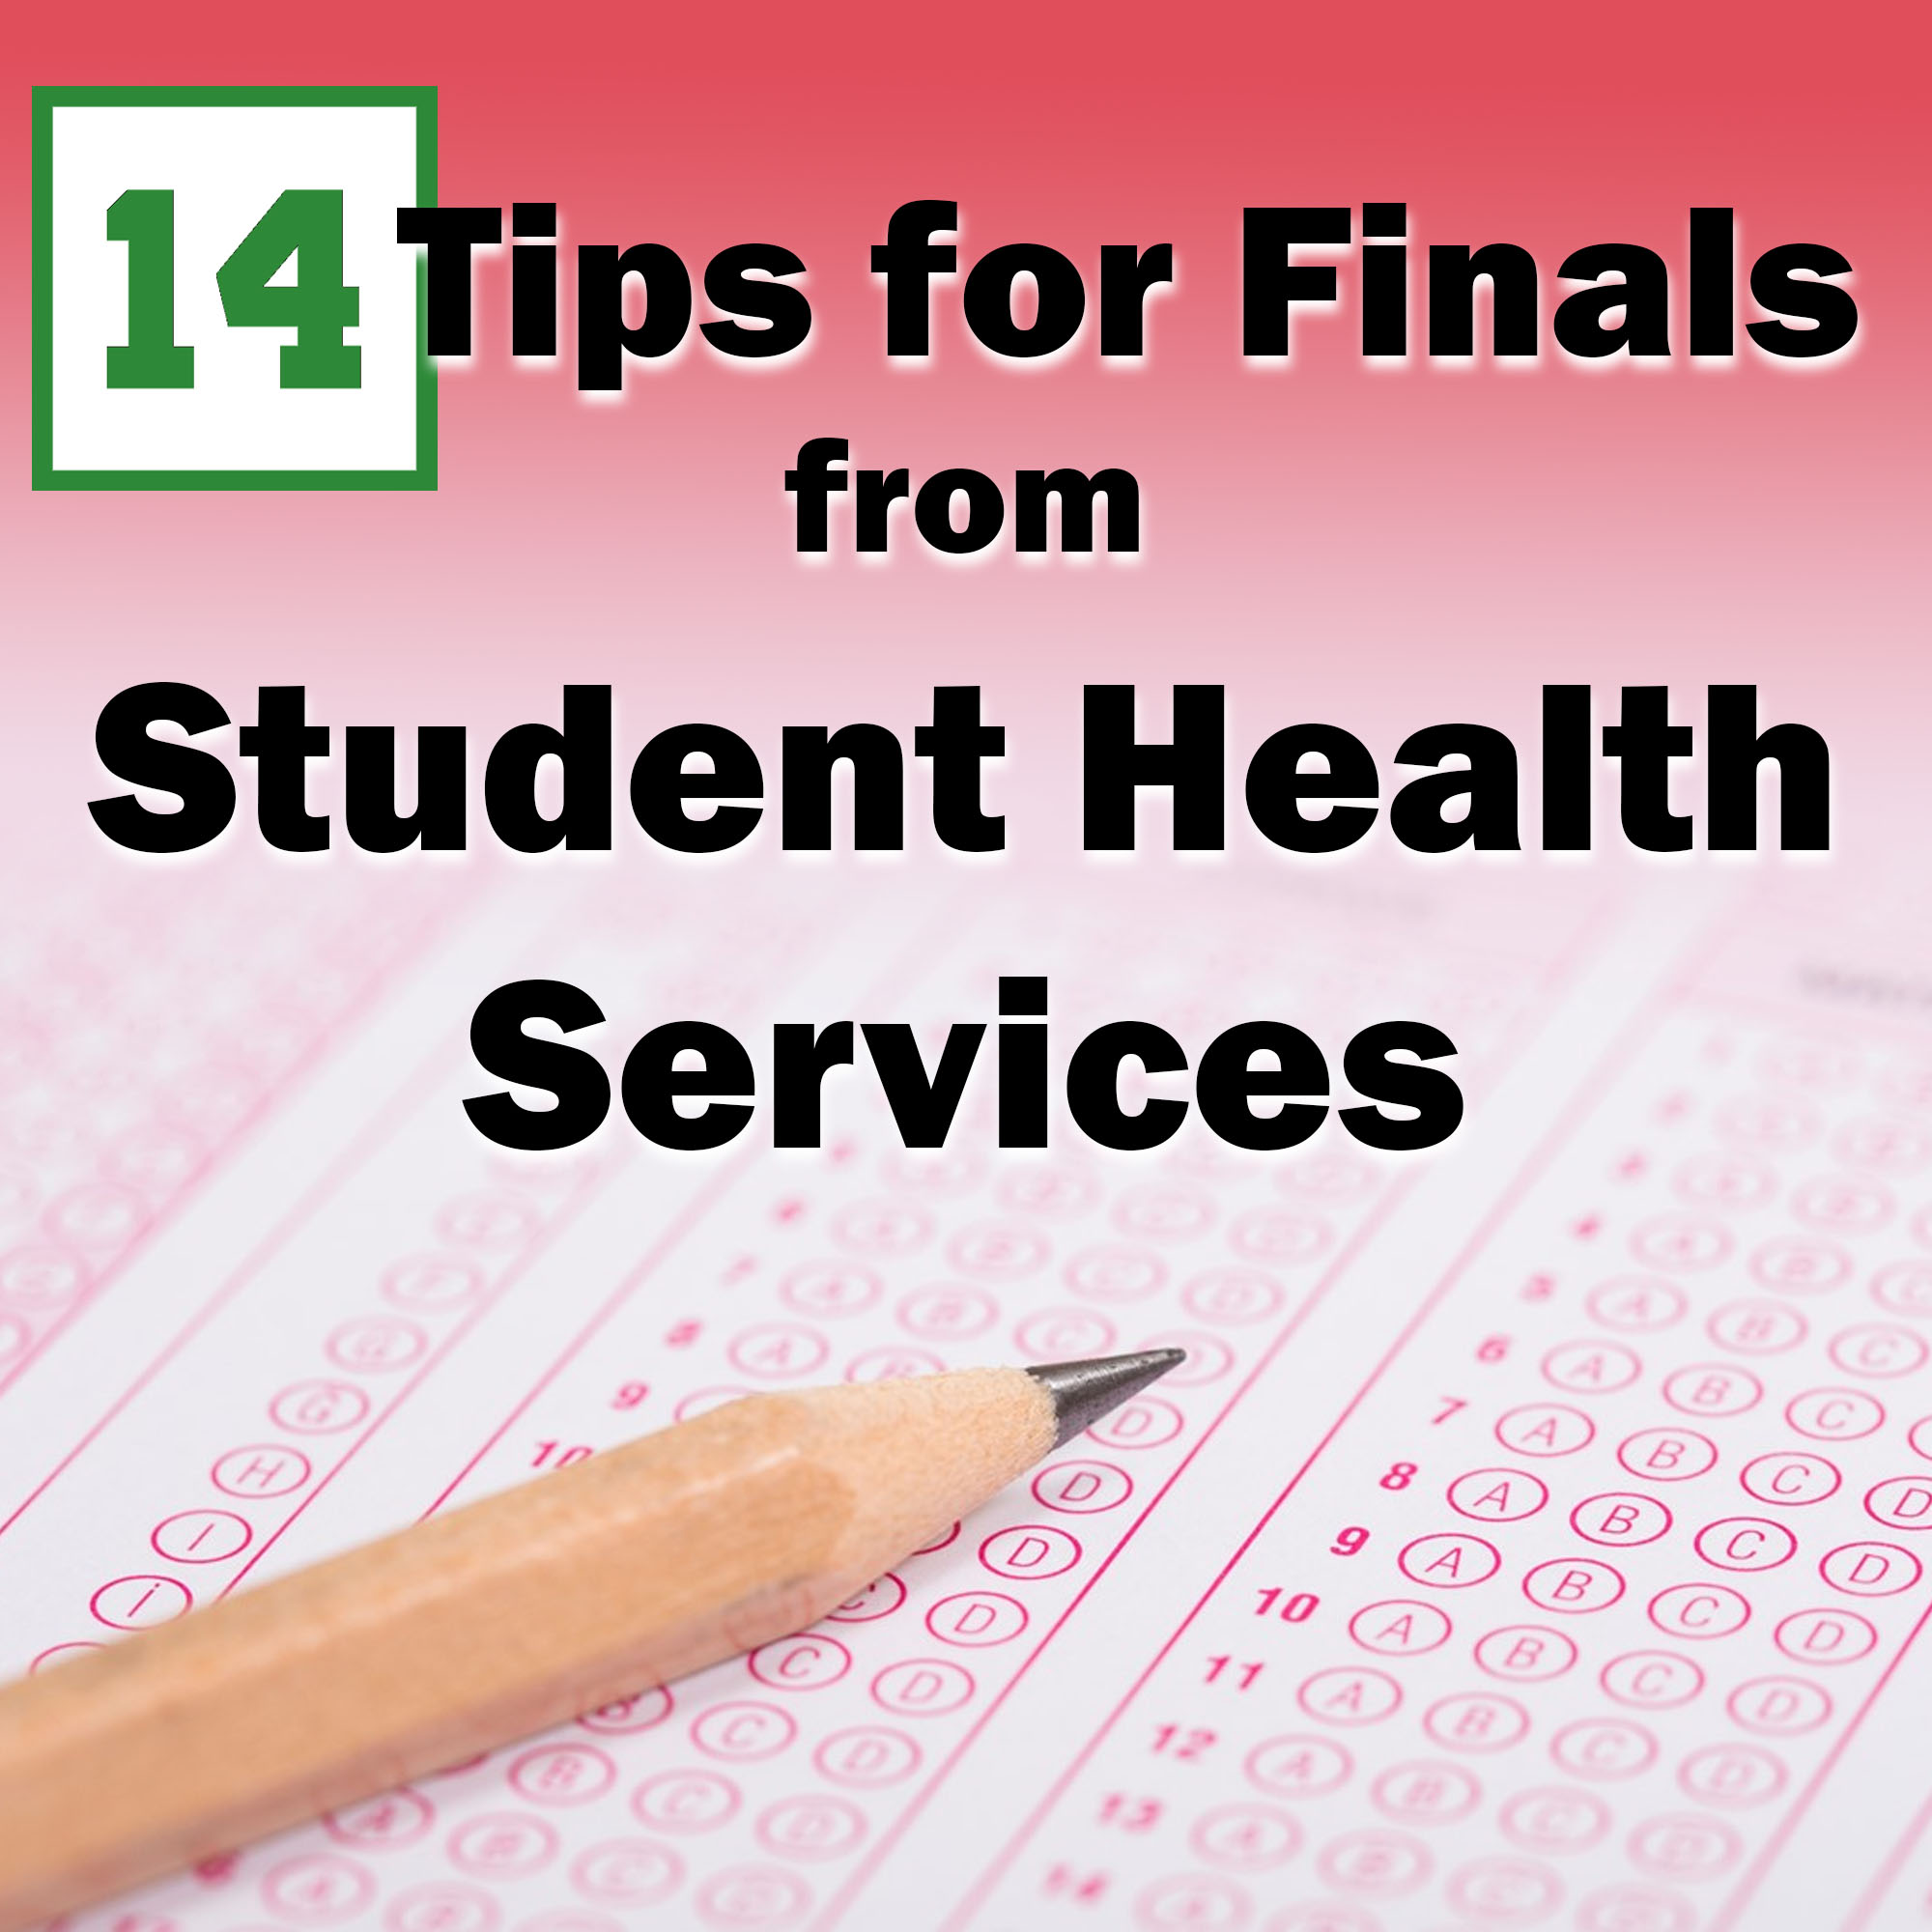 14 Tips for Finals